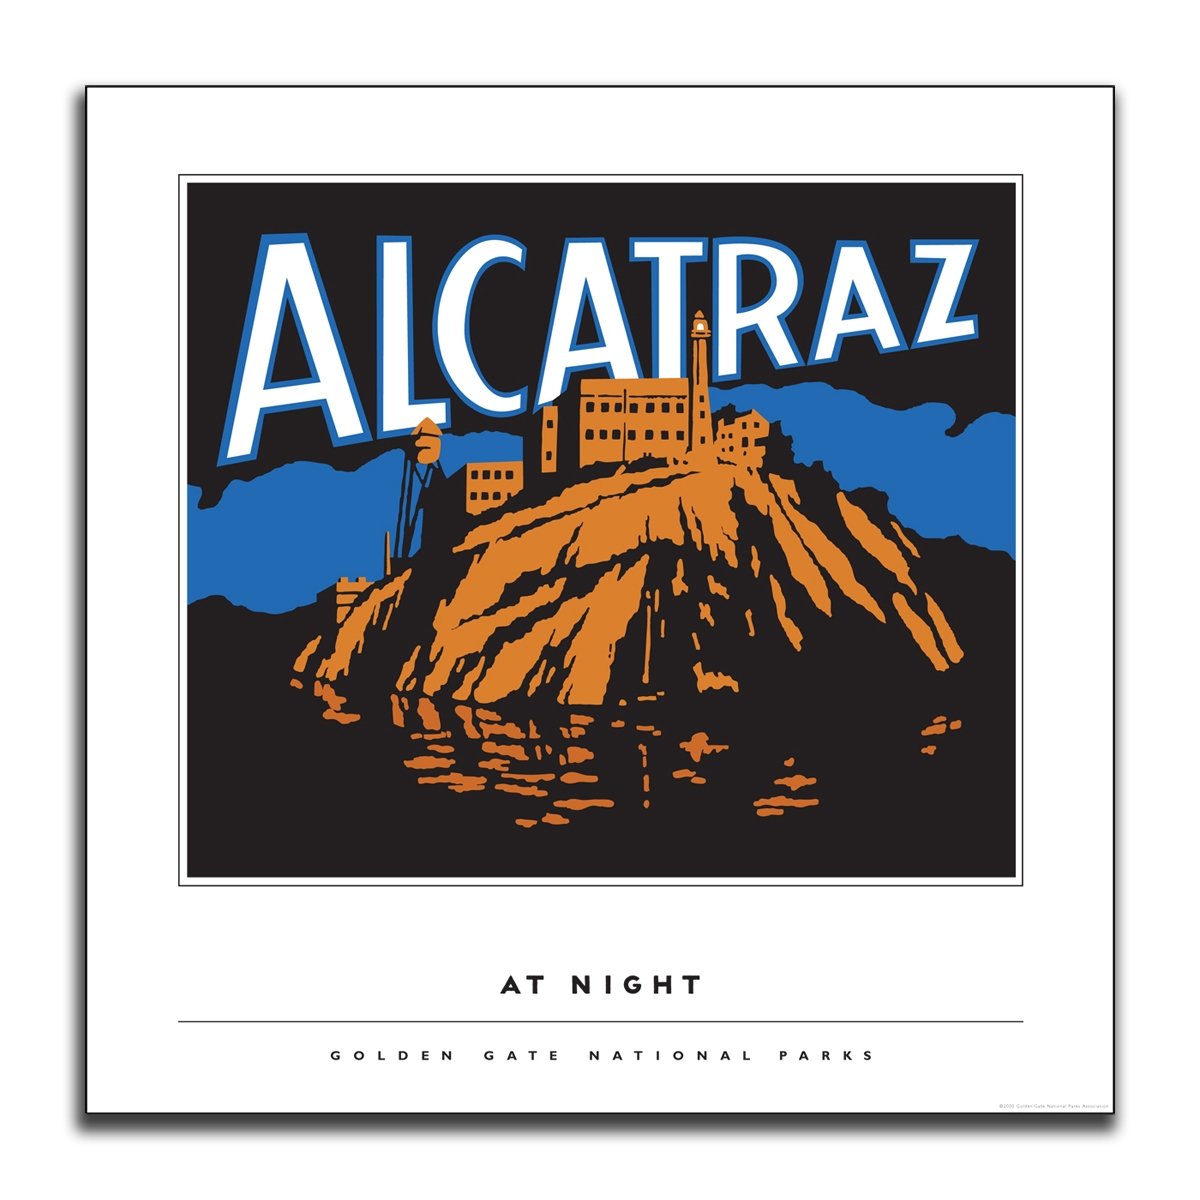 24 x 24.5 inch Alcatraz at Night poster, featuring colorful graphic illustration of notorious former prison.